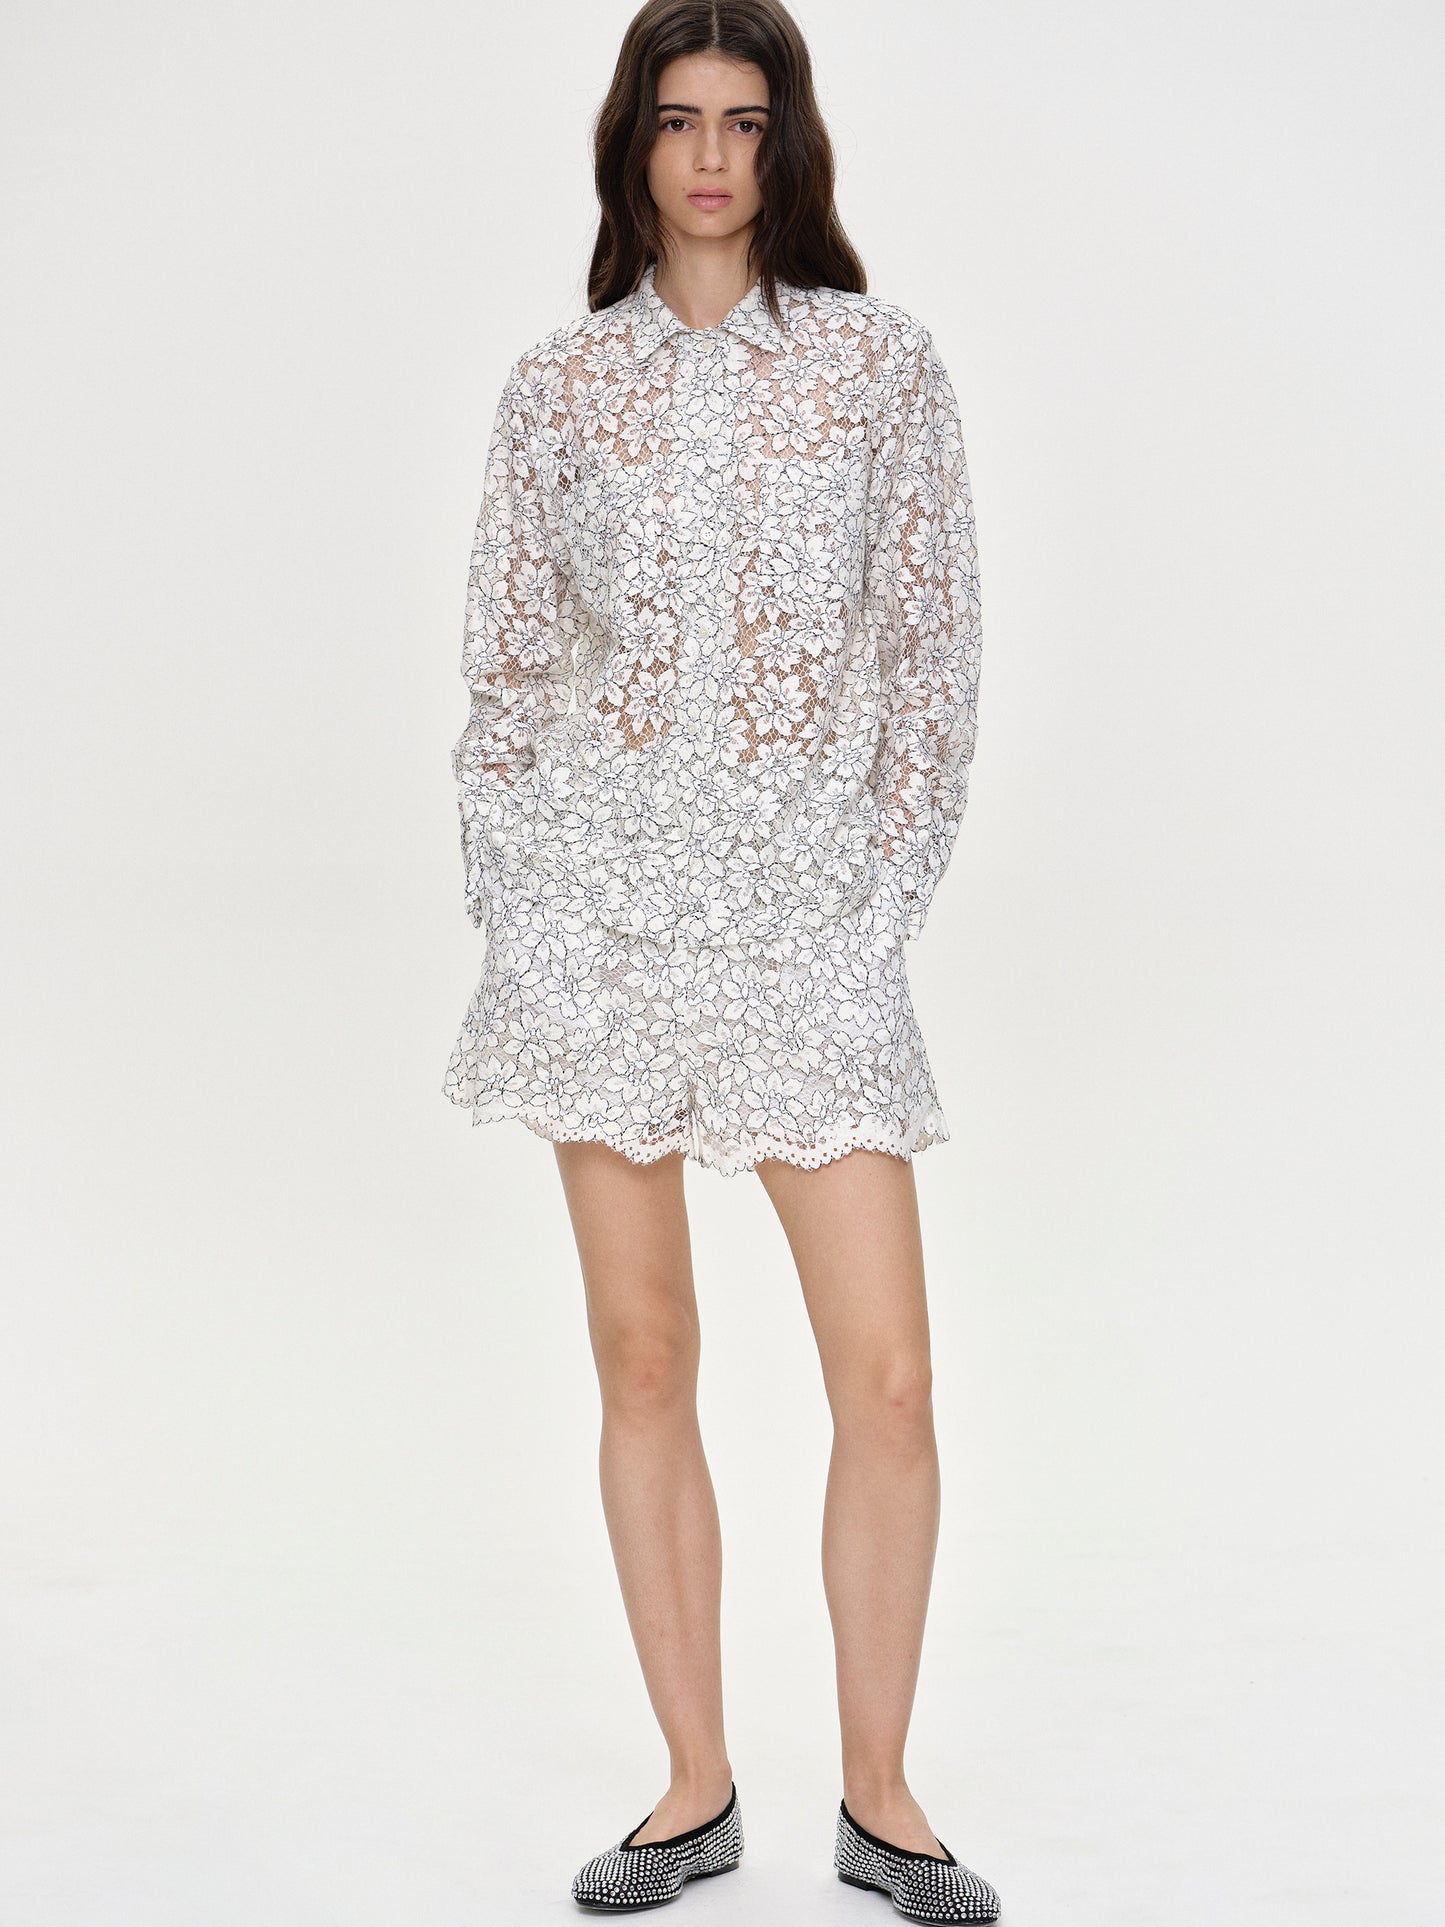 Casati Daisy Embroidered Lace Shirt, White